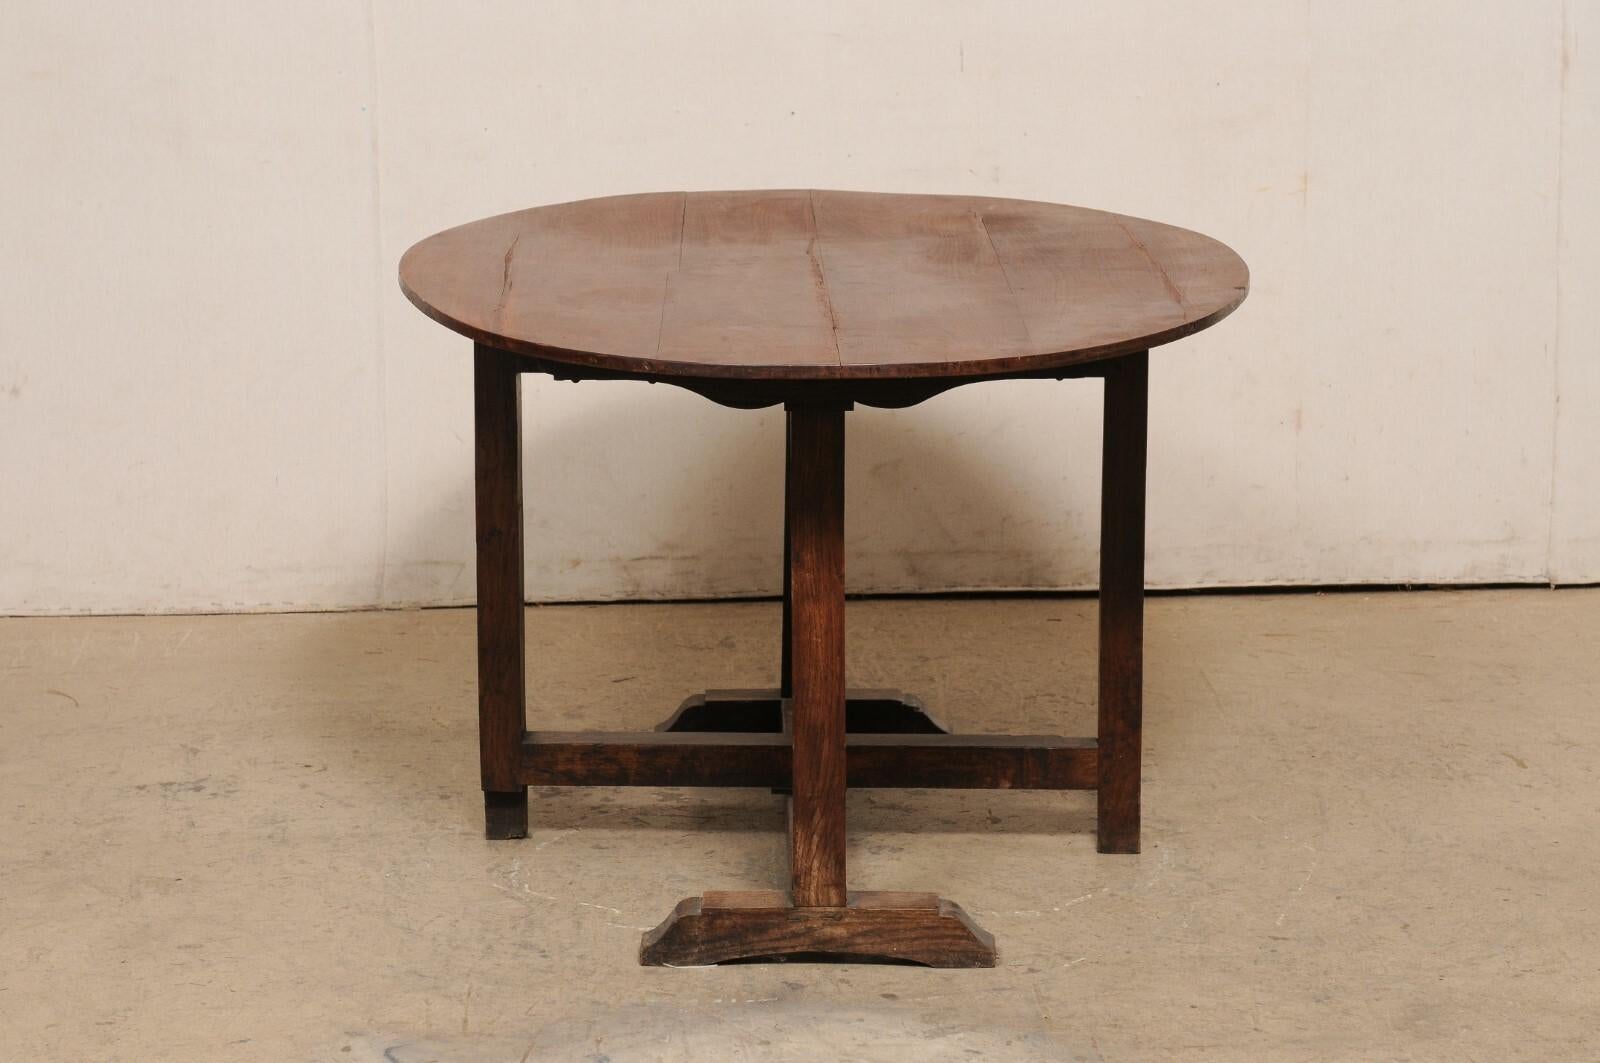 Wood Antique French Vintner's Table, Oval-Shaped For Sale